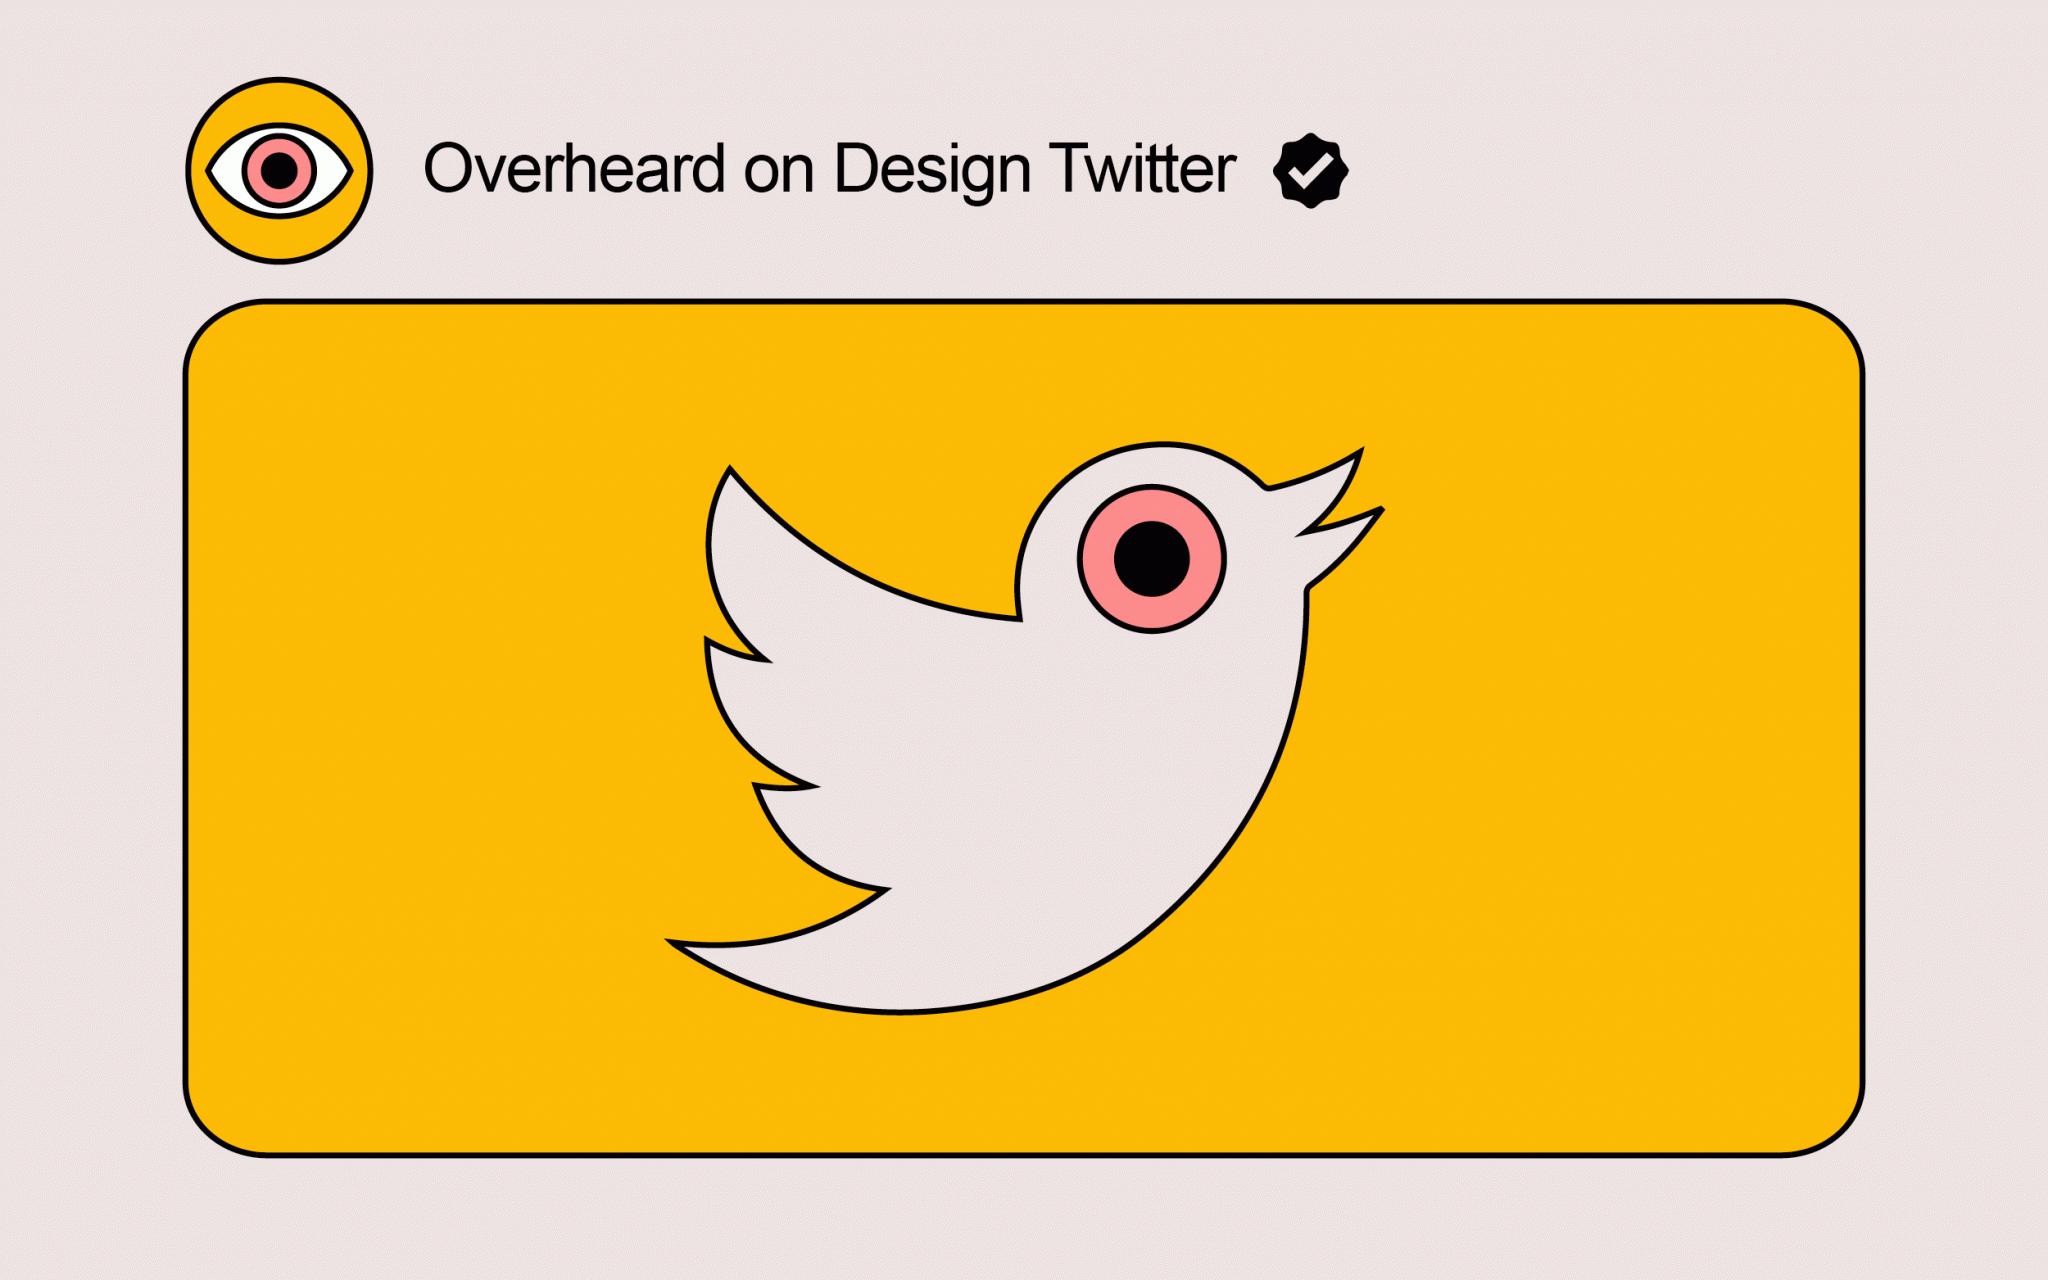 Yellow-themed post from verified account “Overheard on Design Twitter” with a pic of reminiscent of the Twitter bird.